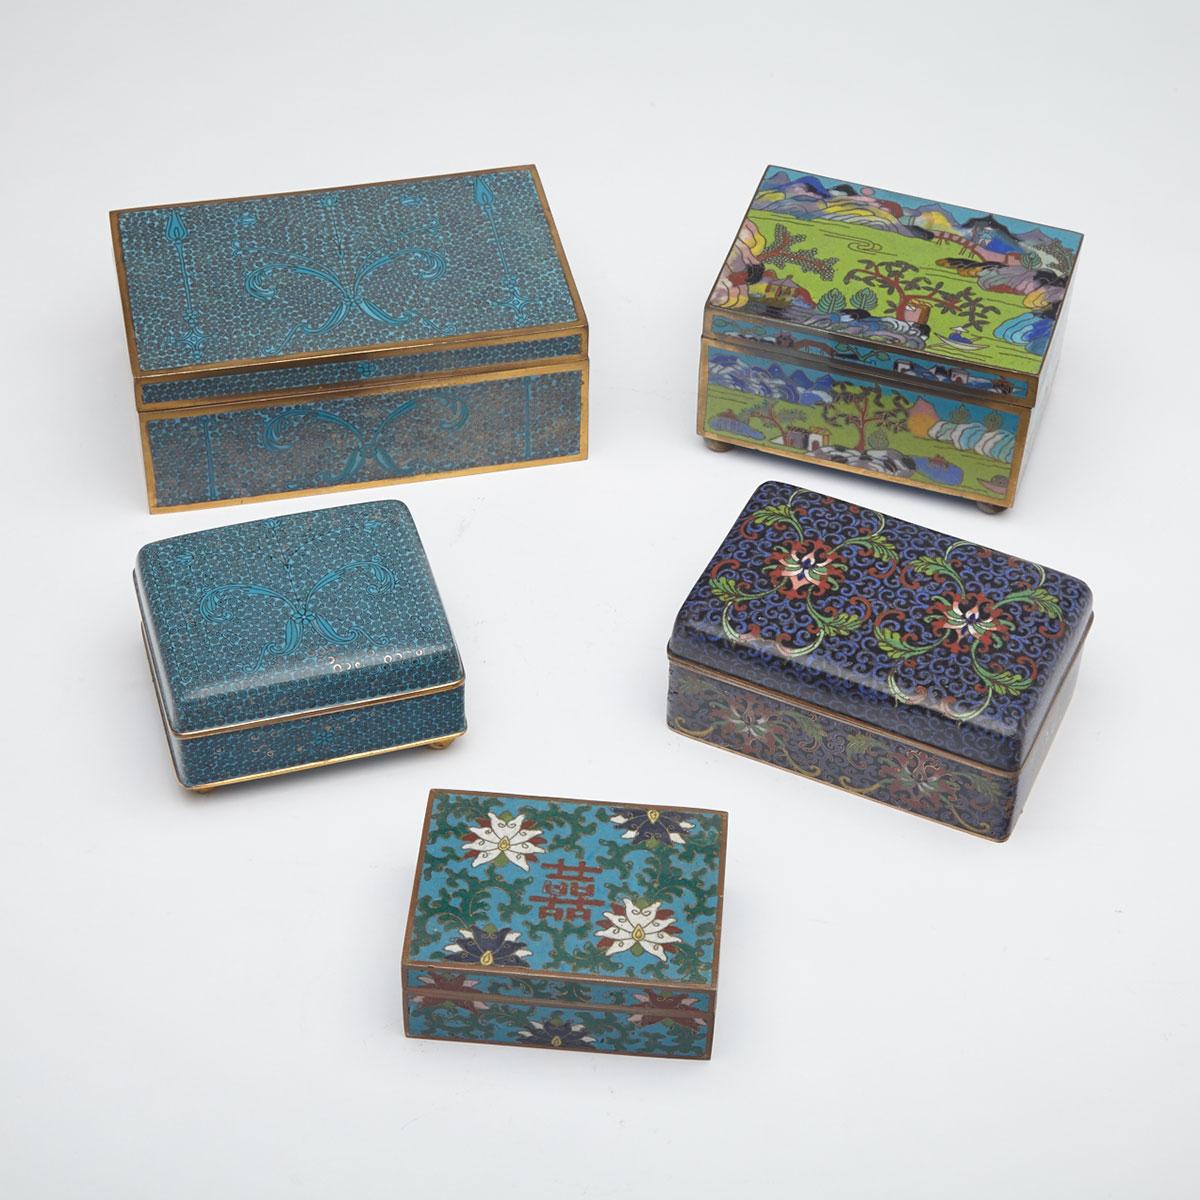 Five Cloisonné Enamel Square Form Boxes, China and Japan, Early 20th Century